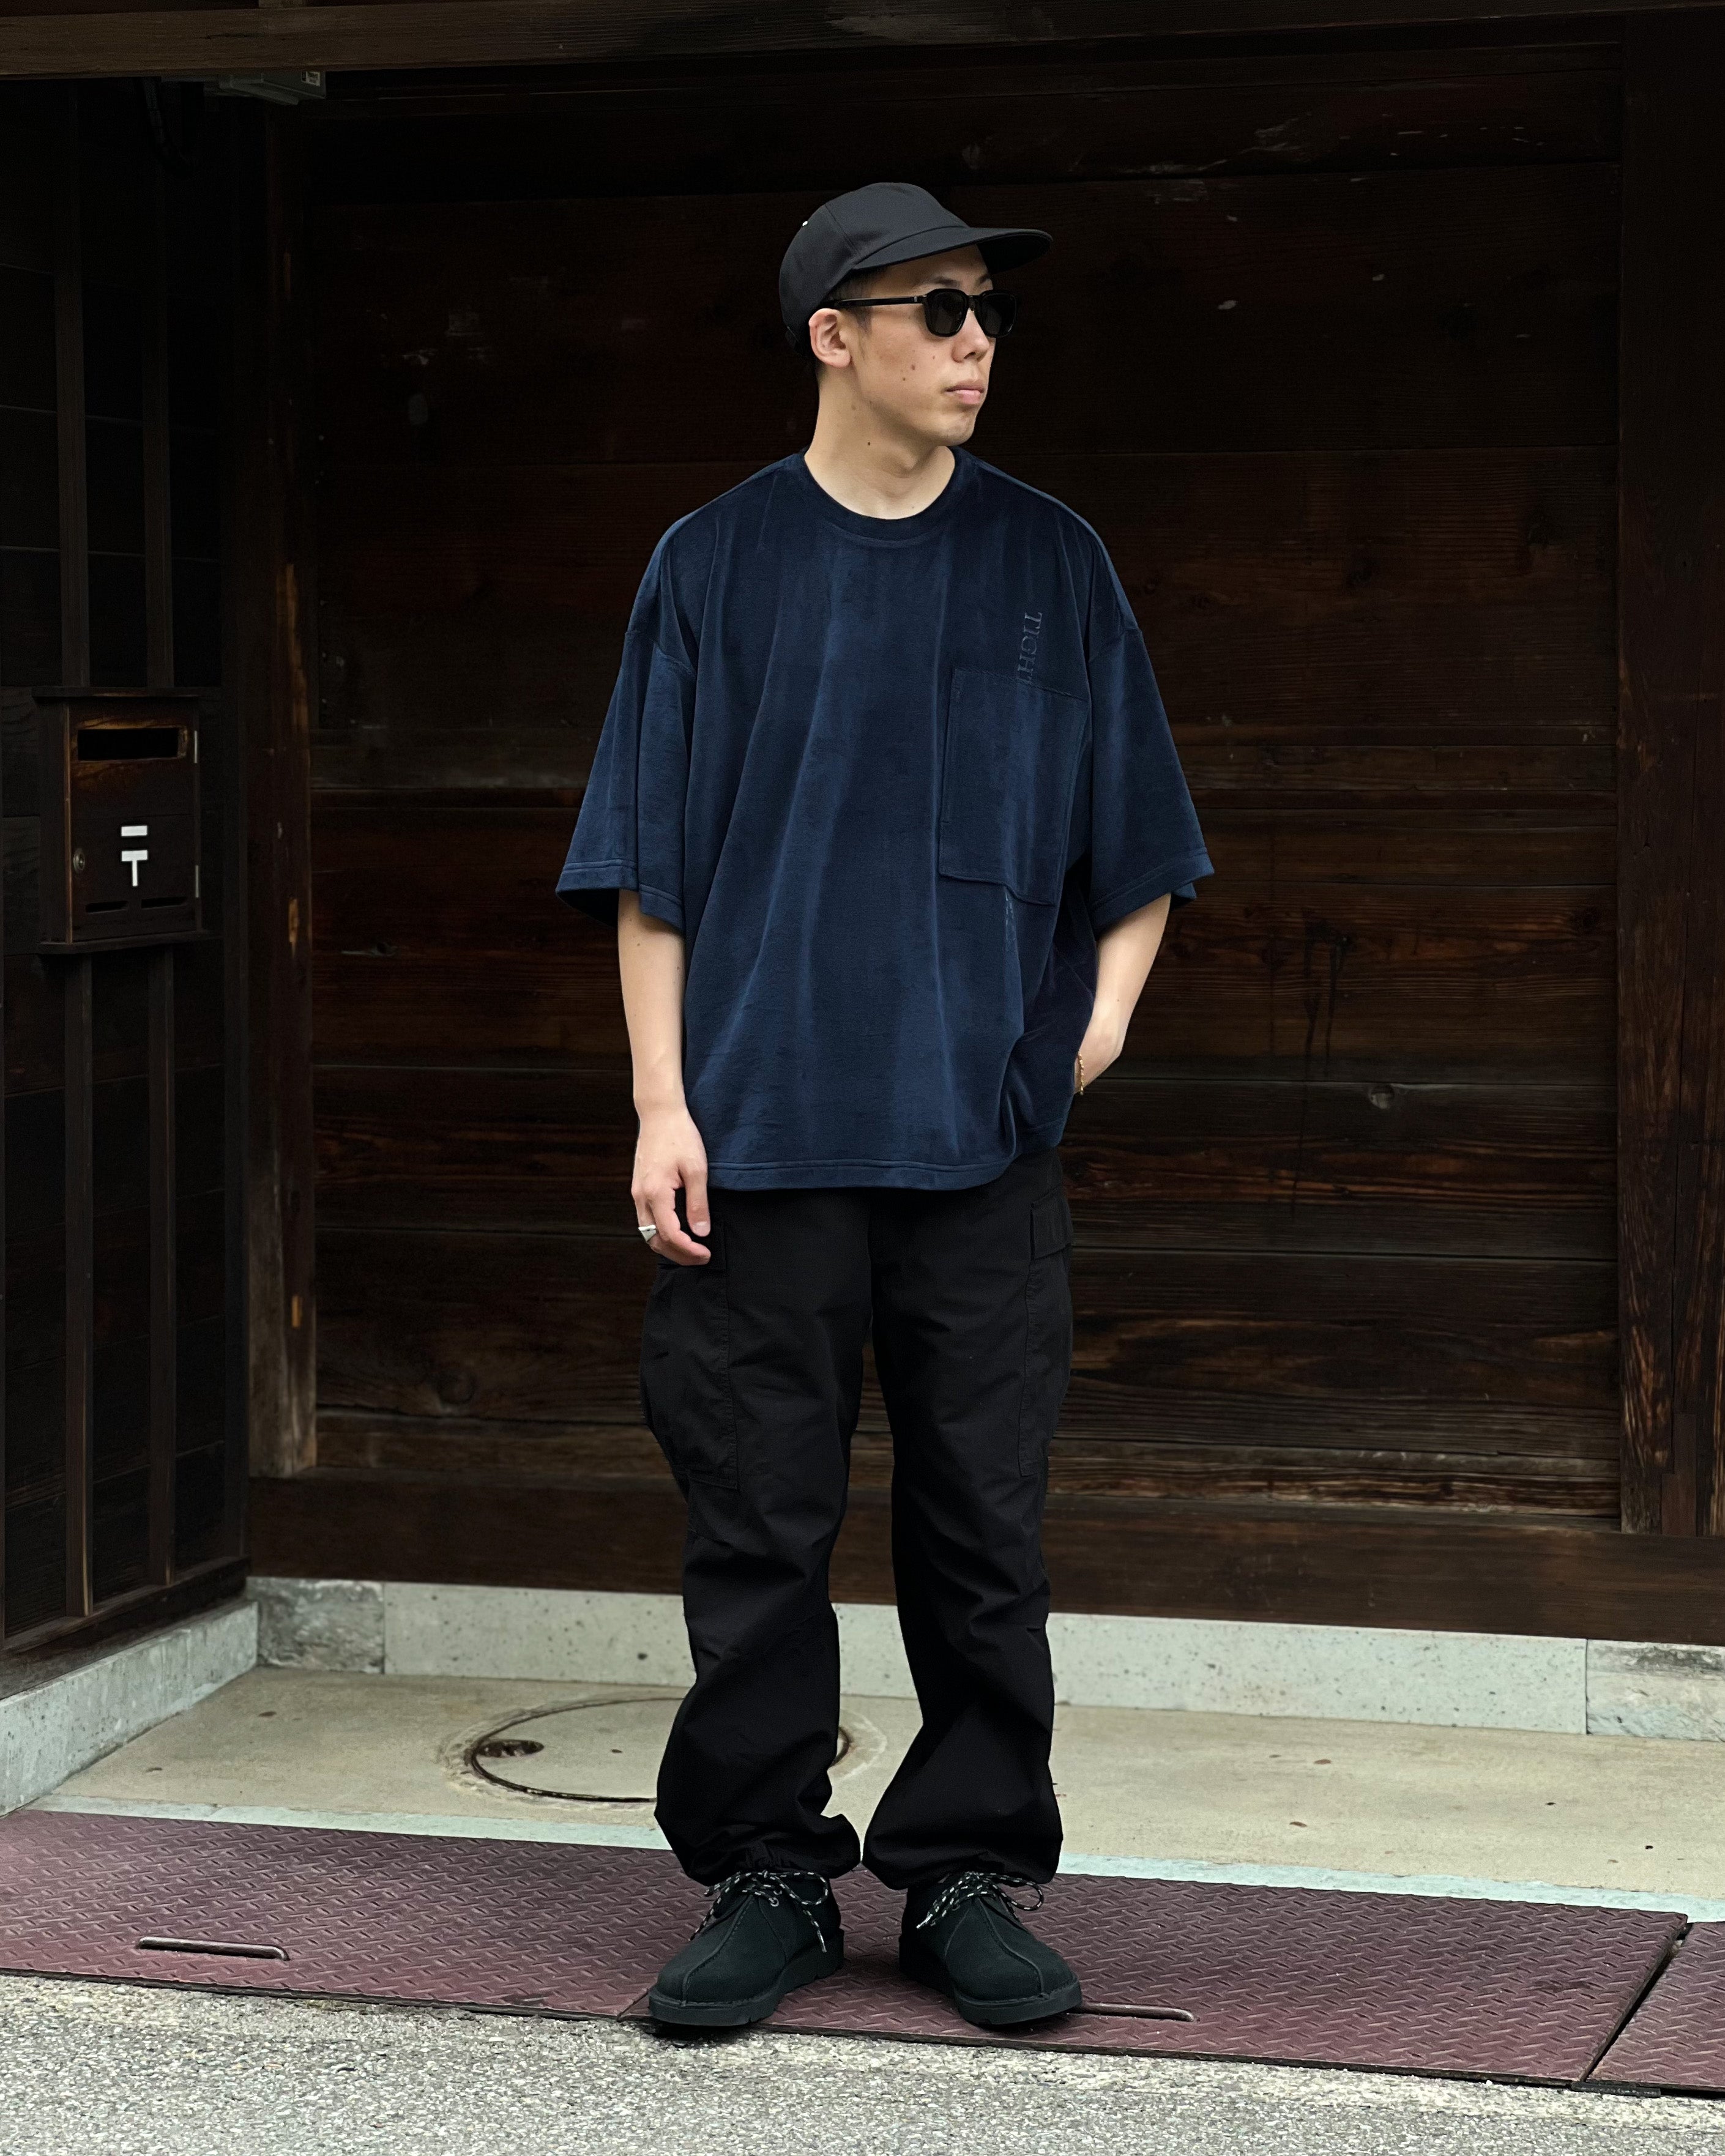 [TIGHTBOOTH] STRAIGHT UP VELOR T-SHIRT - NAVY